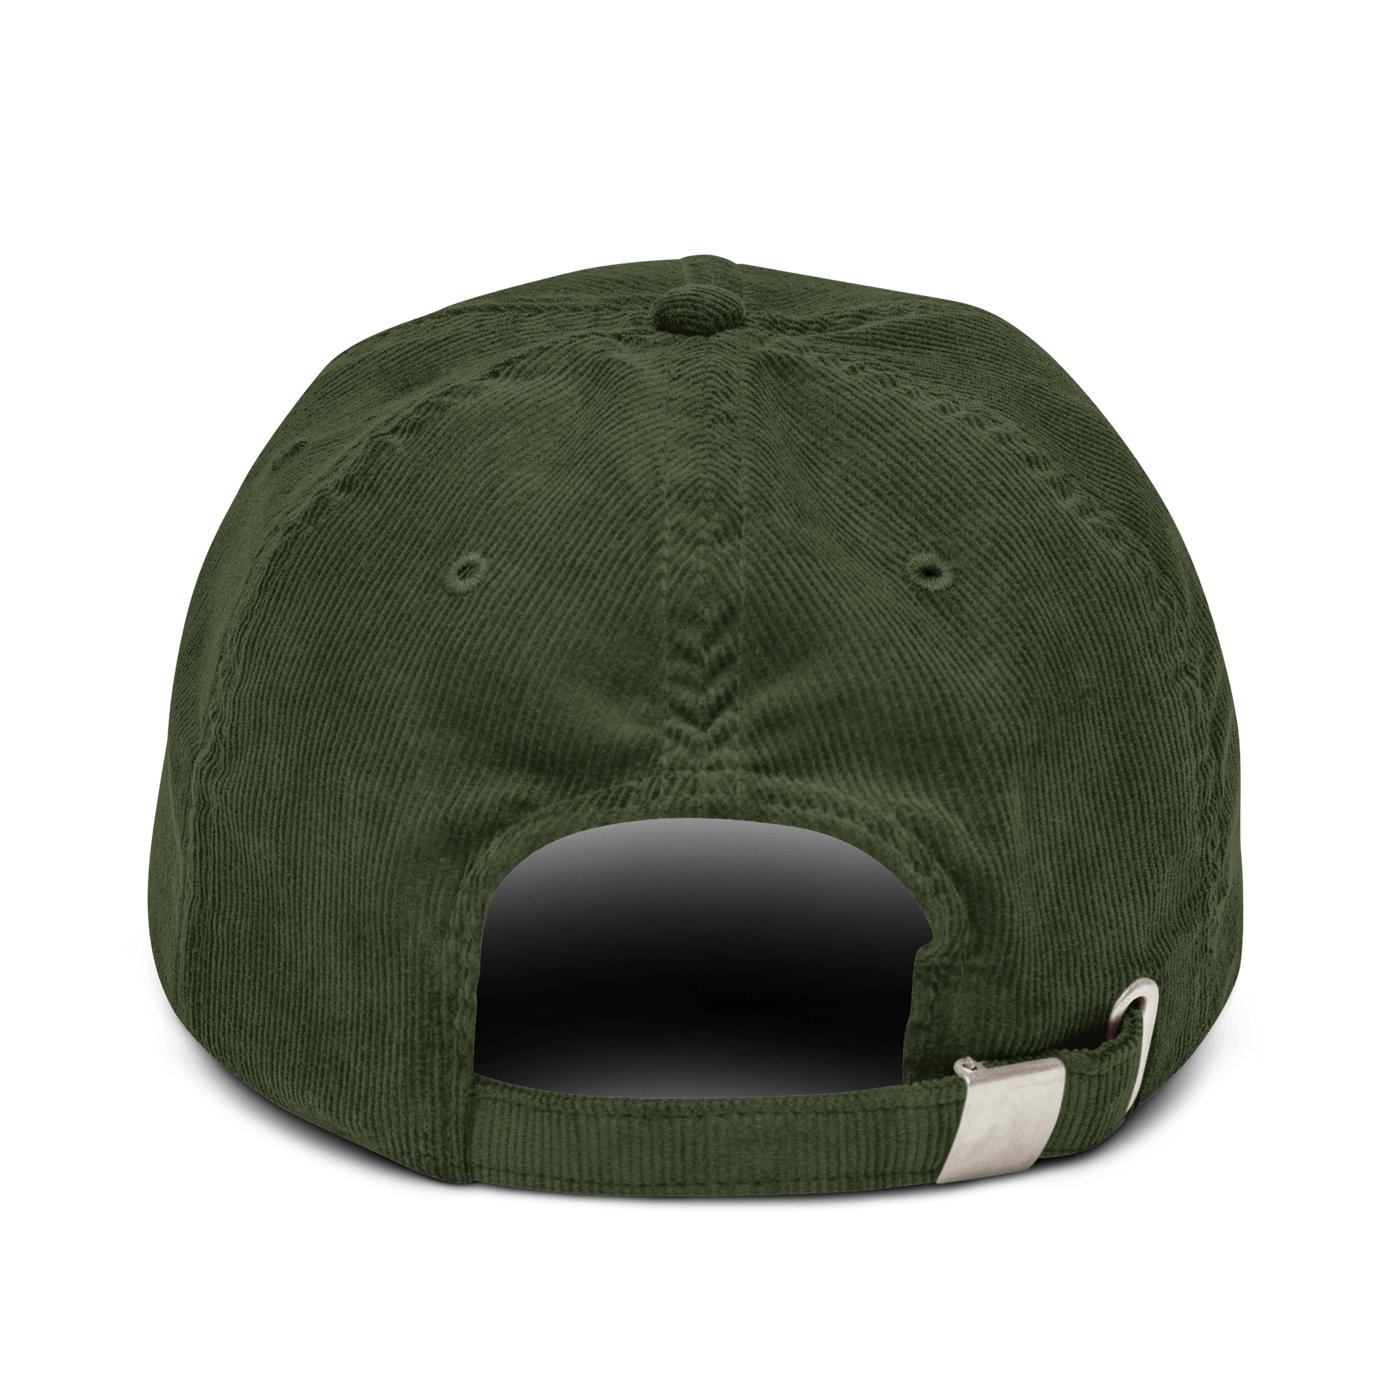 FAKE Corduroy hat - Dark Olive - - Just Another Cap Store